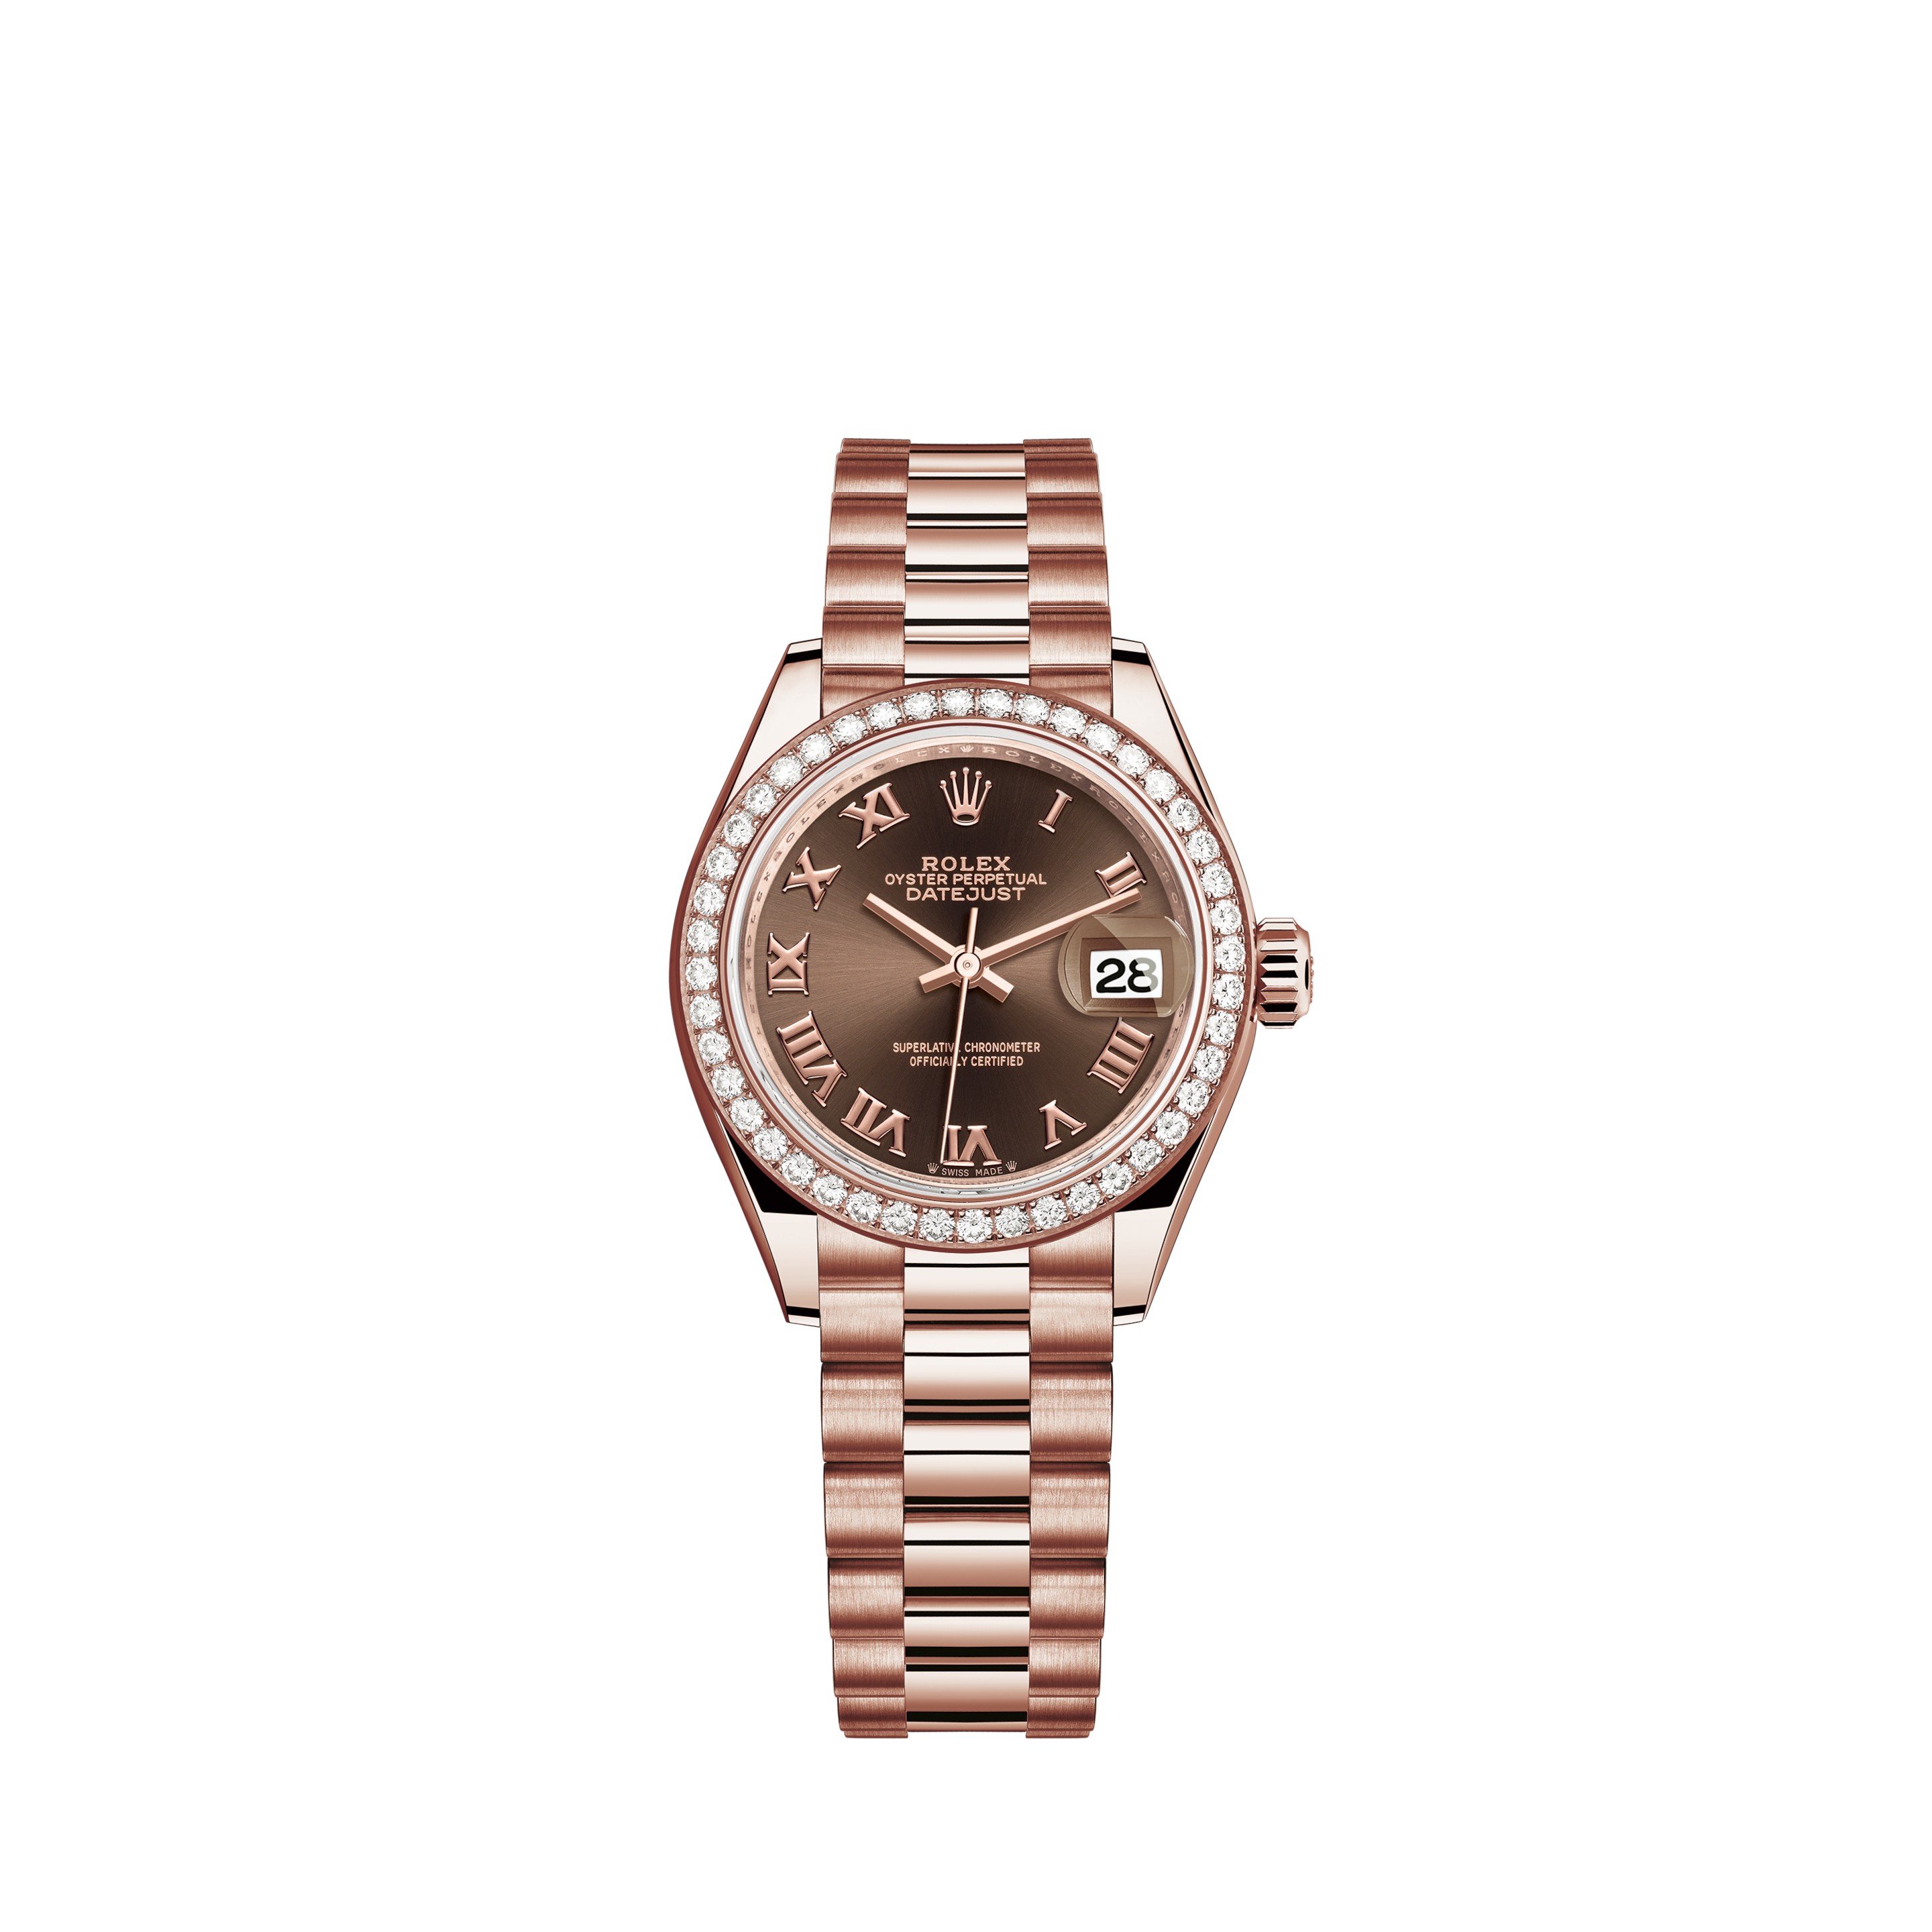 Rolex Lady Datejust 28mm Stainless Steel and Everose Gold 279171 White Roman Oyster